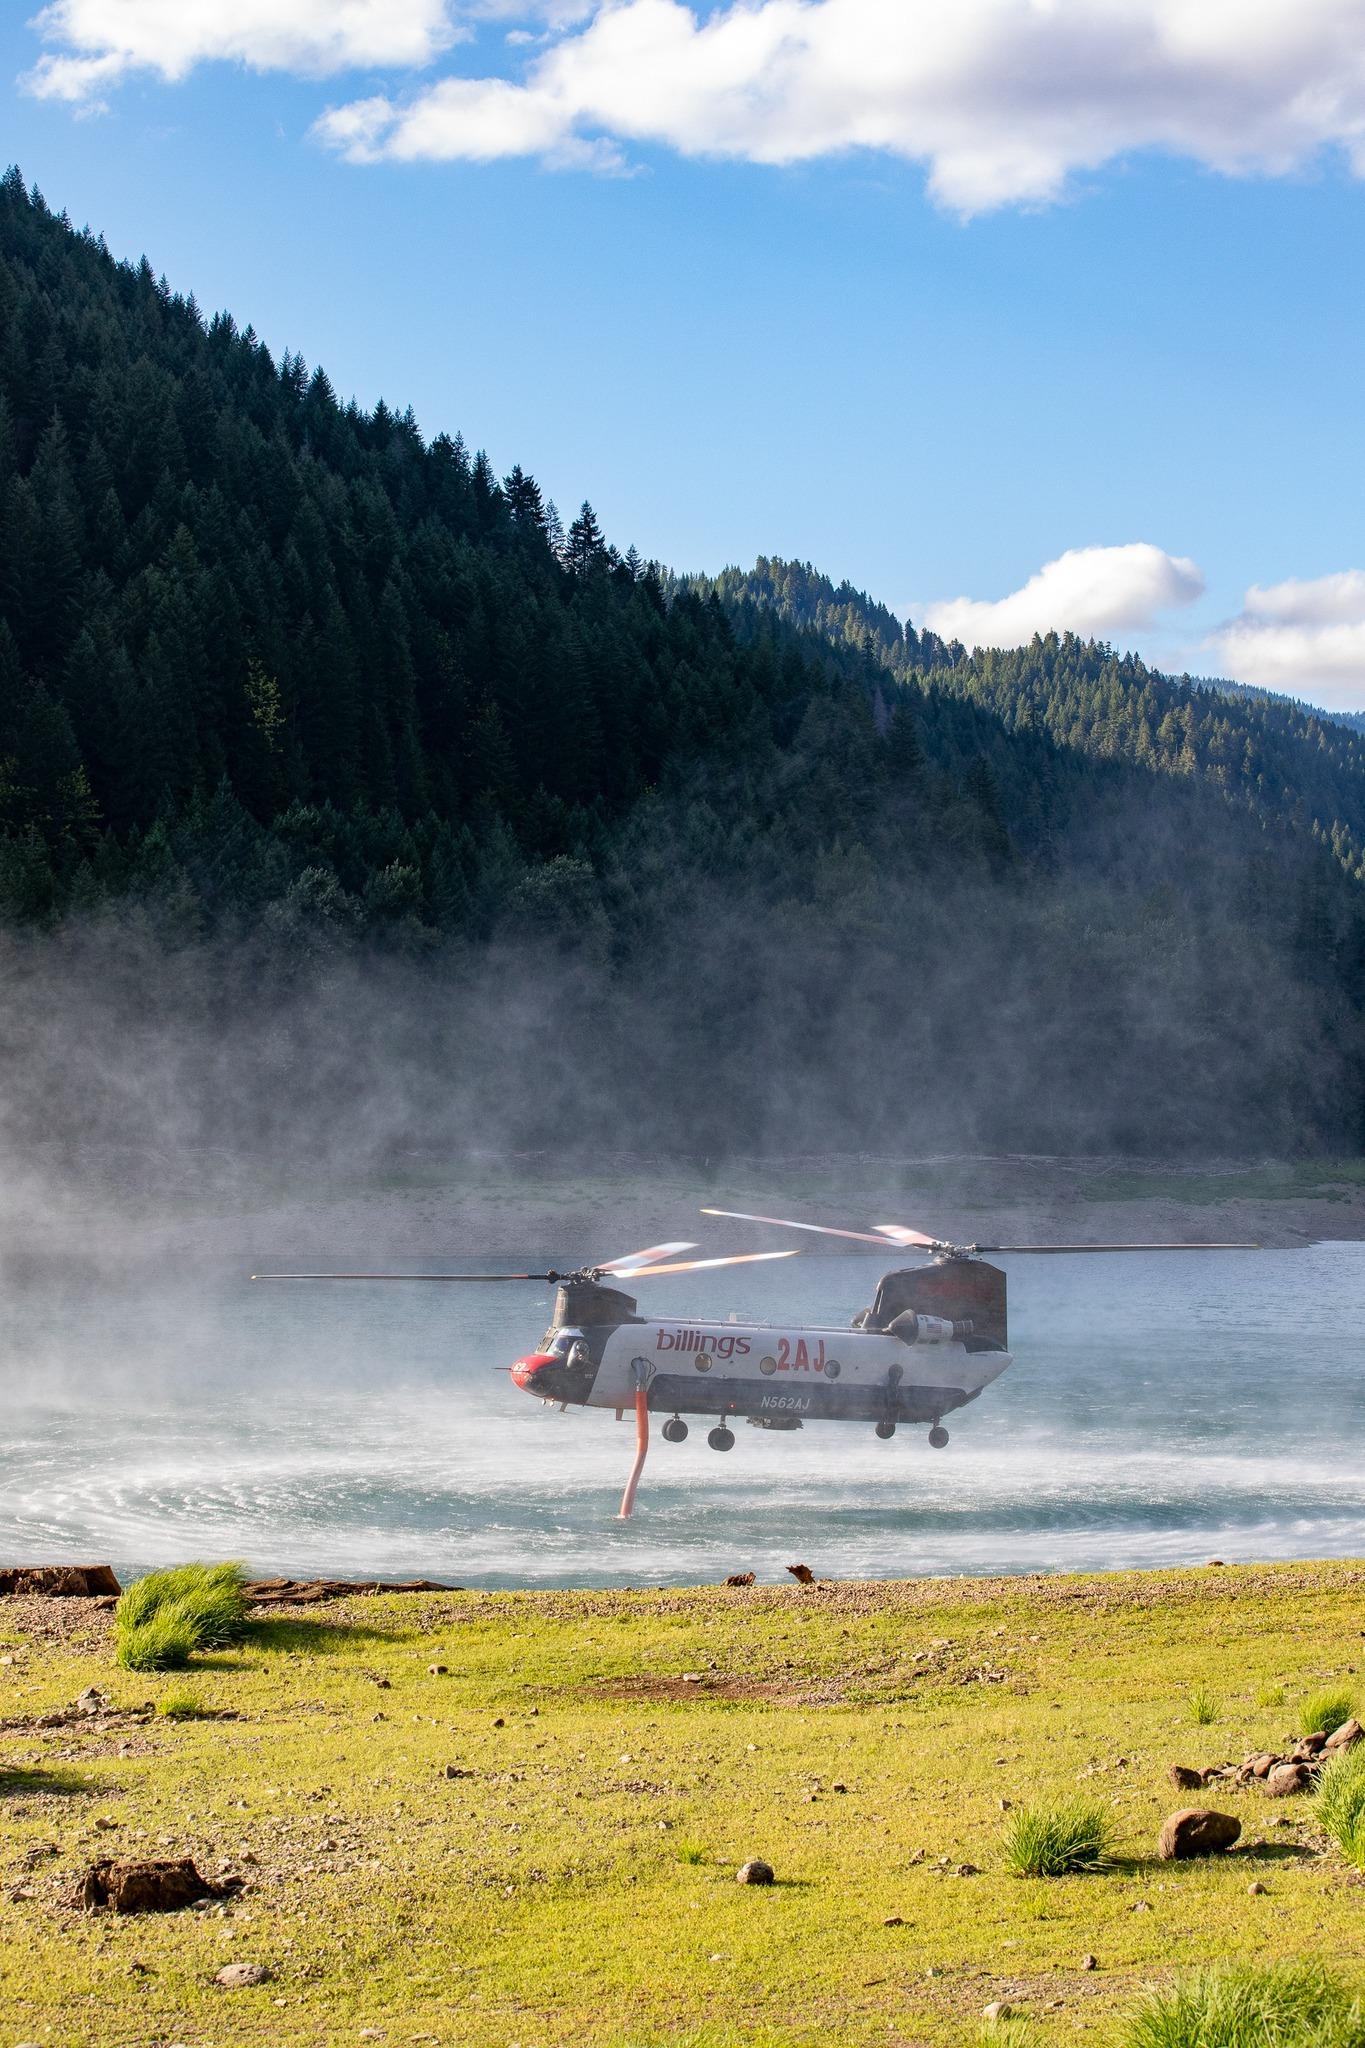 A helicopter hovers over a Lake while it fills with water.